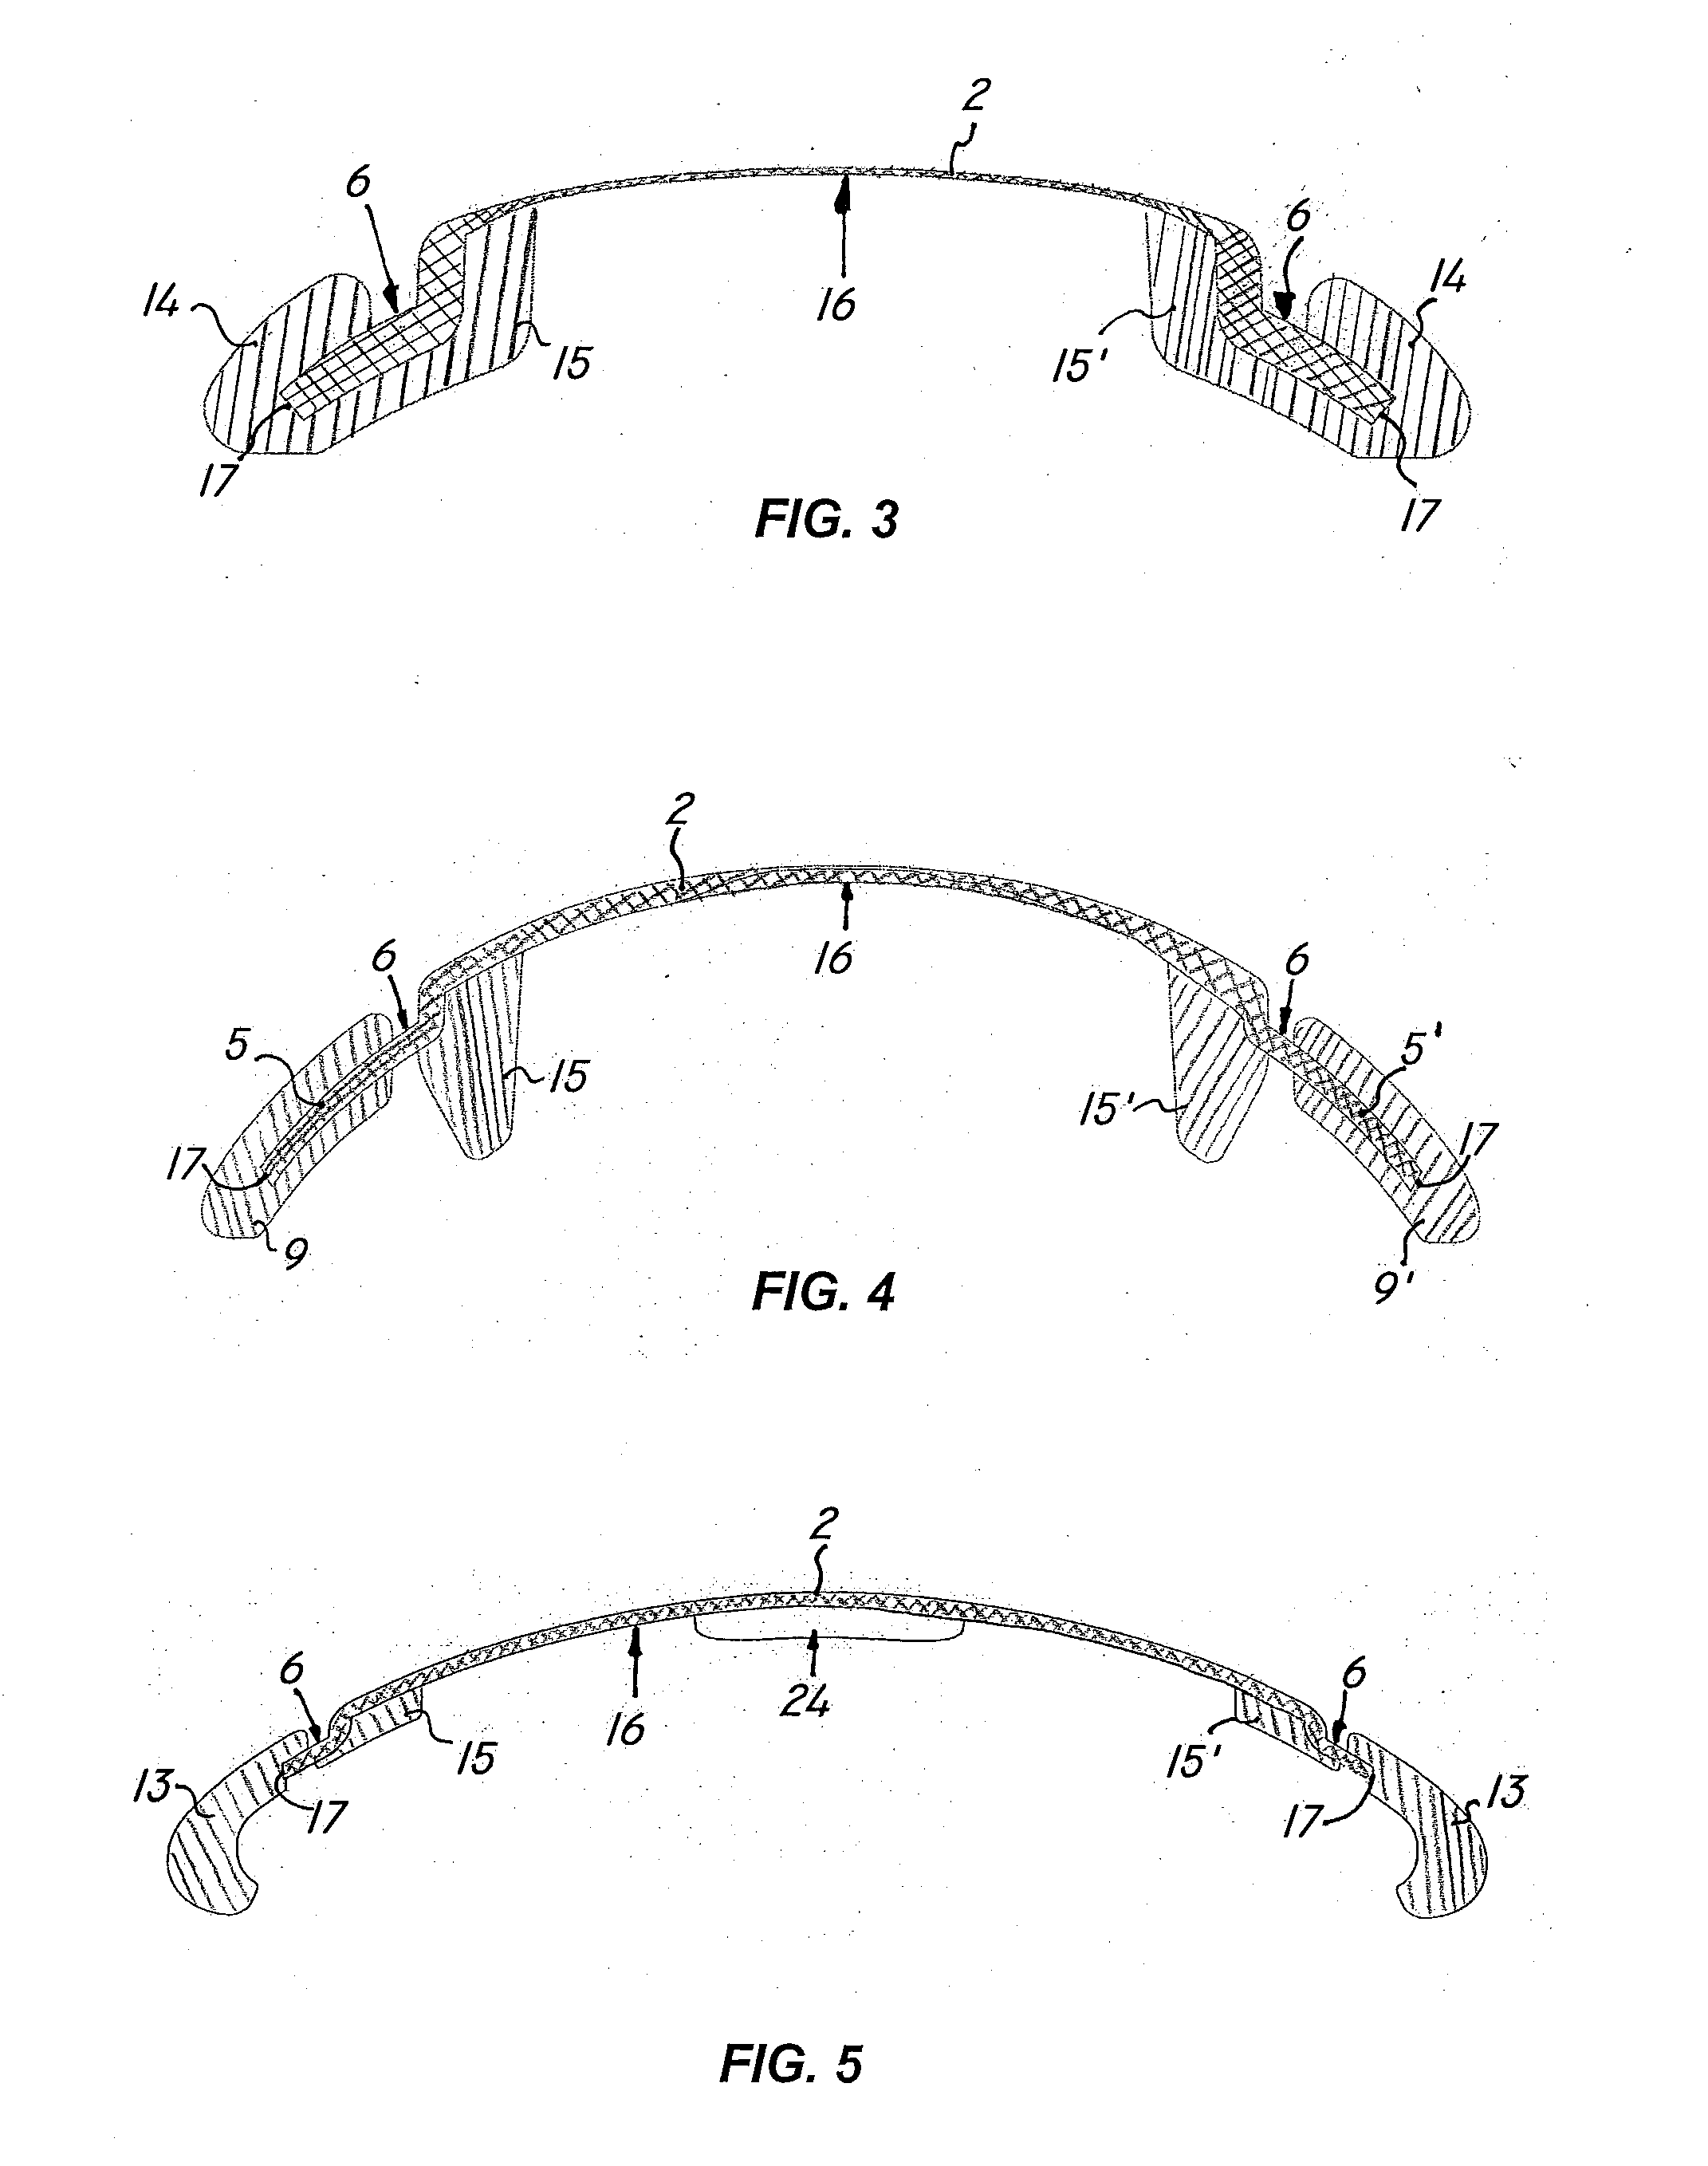 Seating structure and method of making same